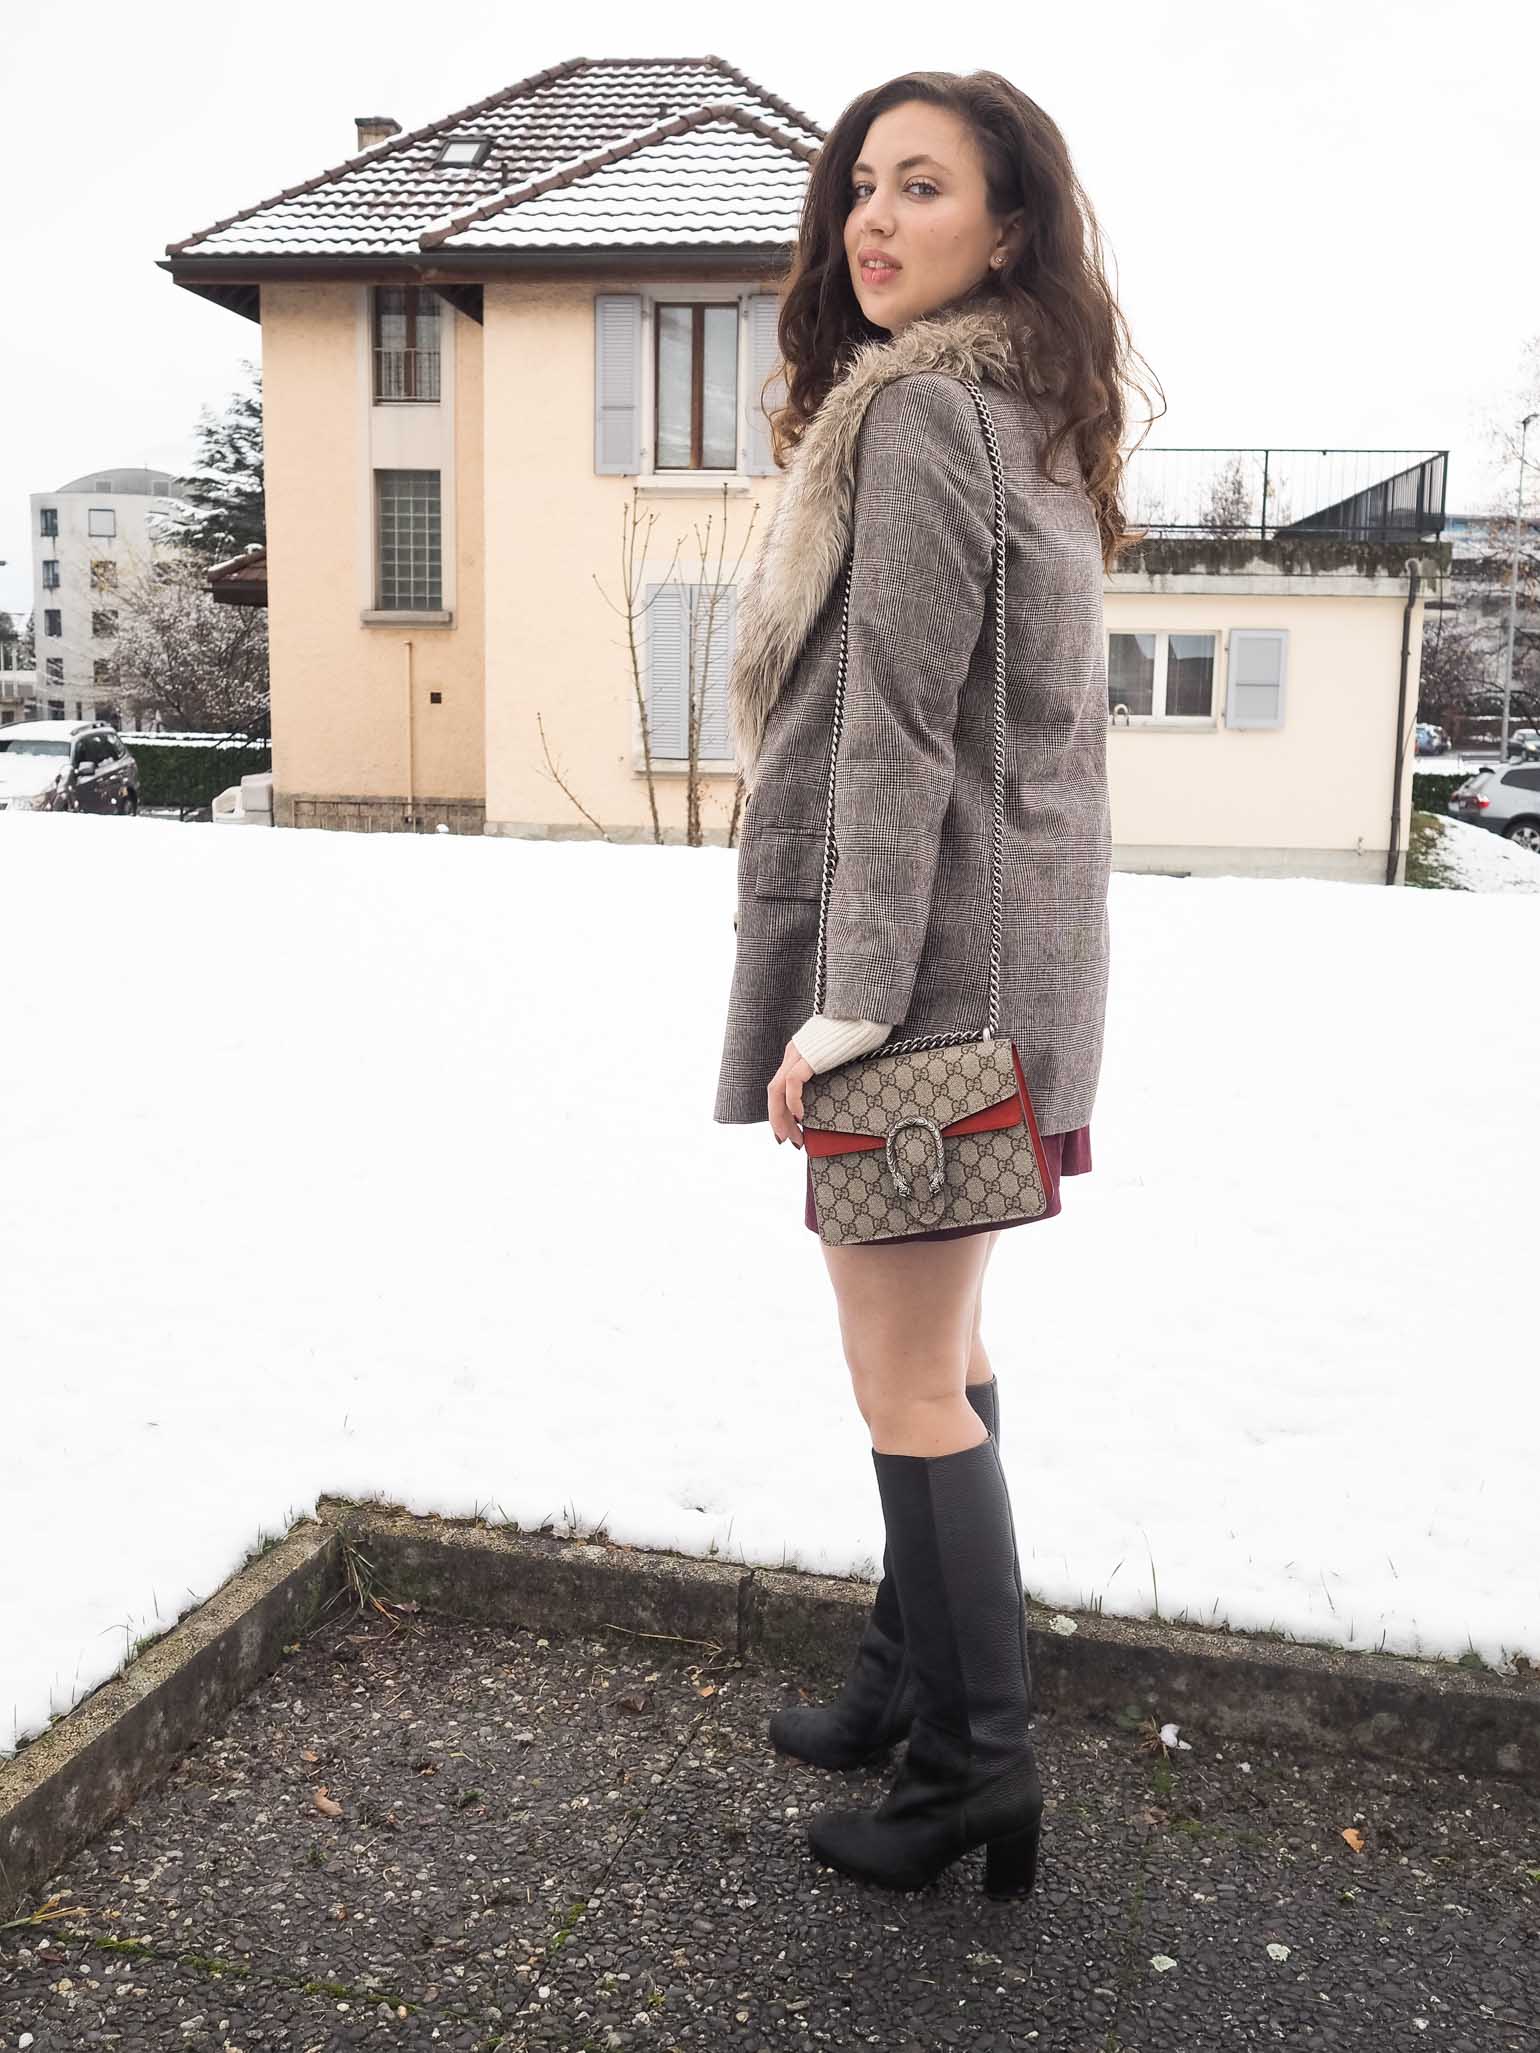 I'm in the Christmas Spirit: Plaid Holiday Look - The Brunette Nomad, Dallas fashion blogger